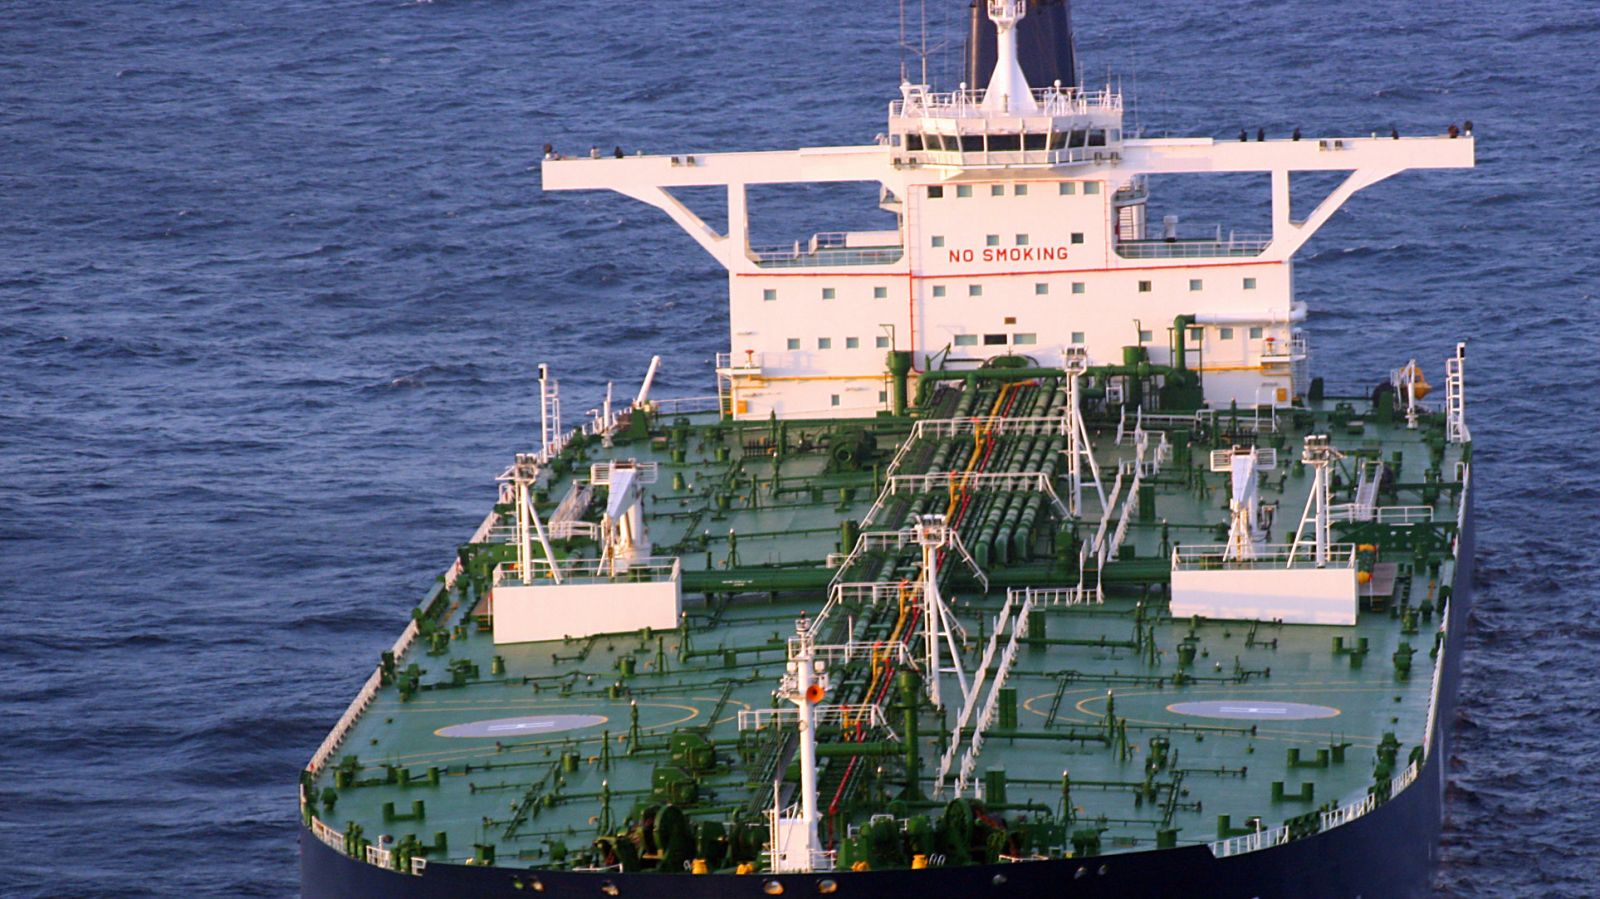 http://maritime-executive.com/media/images/article/Photos/Vessels_Large/Cropped/VLCC-16x9.jpg